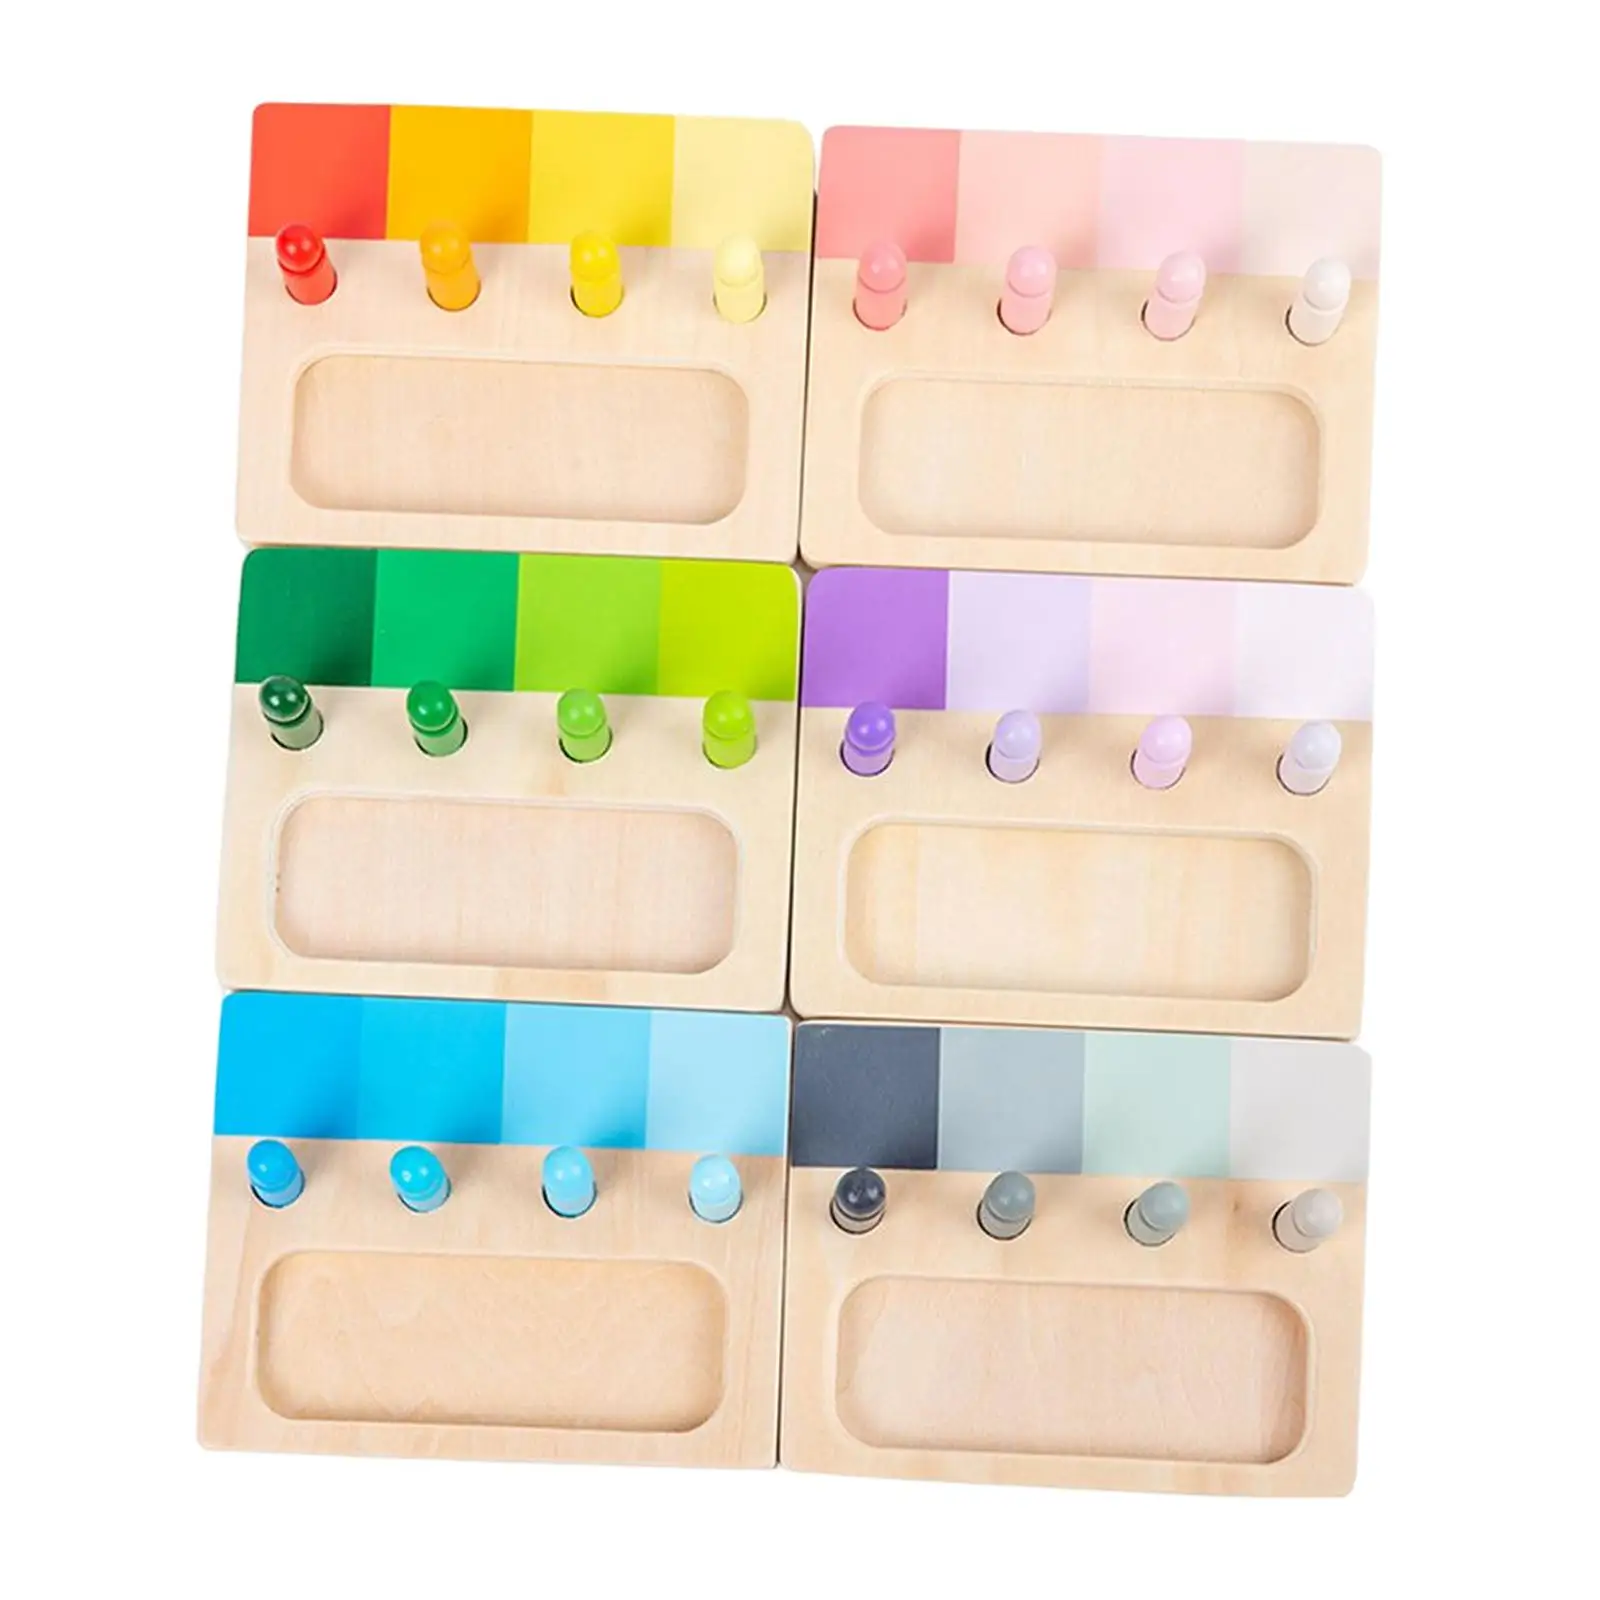 6 Pieces Educational Color Matching Toy Devlopment Toy Wood Color palette for Game